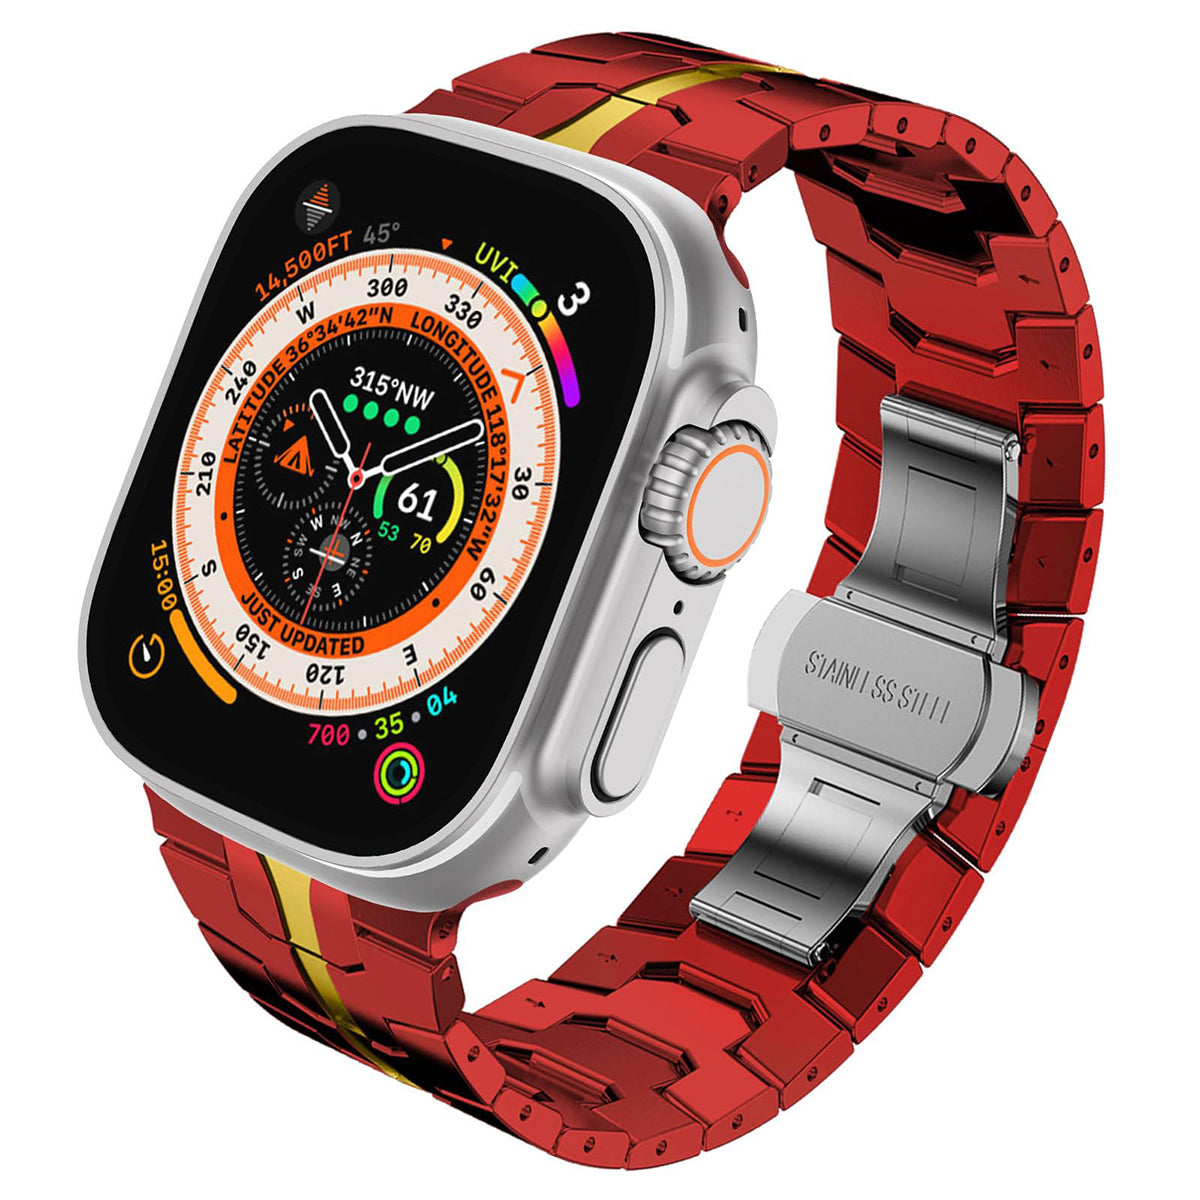 ChronoLuxe Steel Link Band For Apple Watch Multiple Colors Available